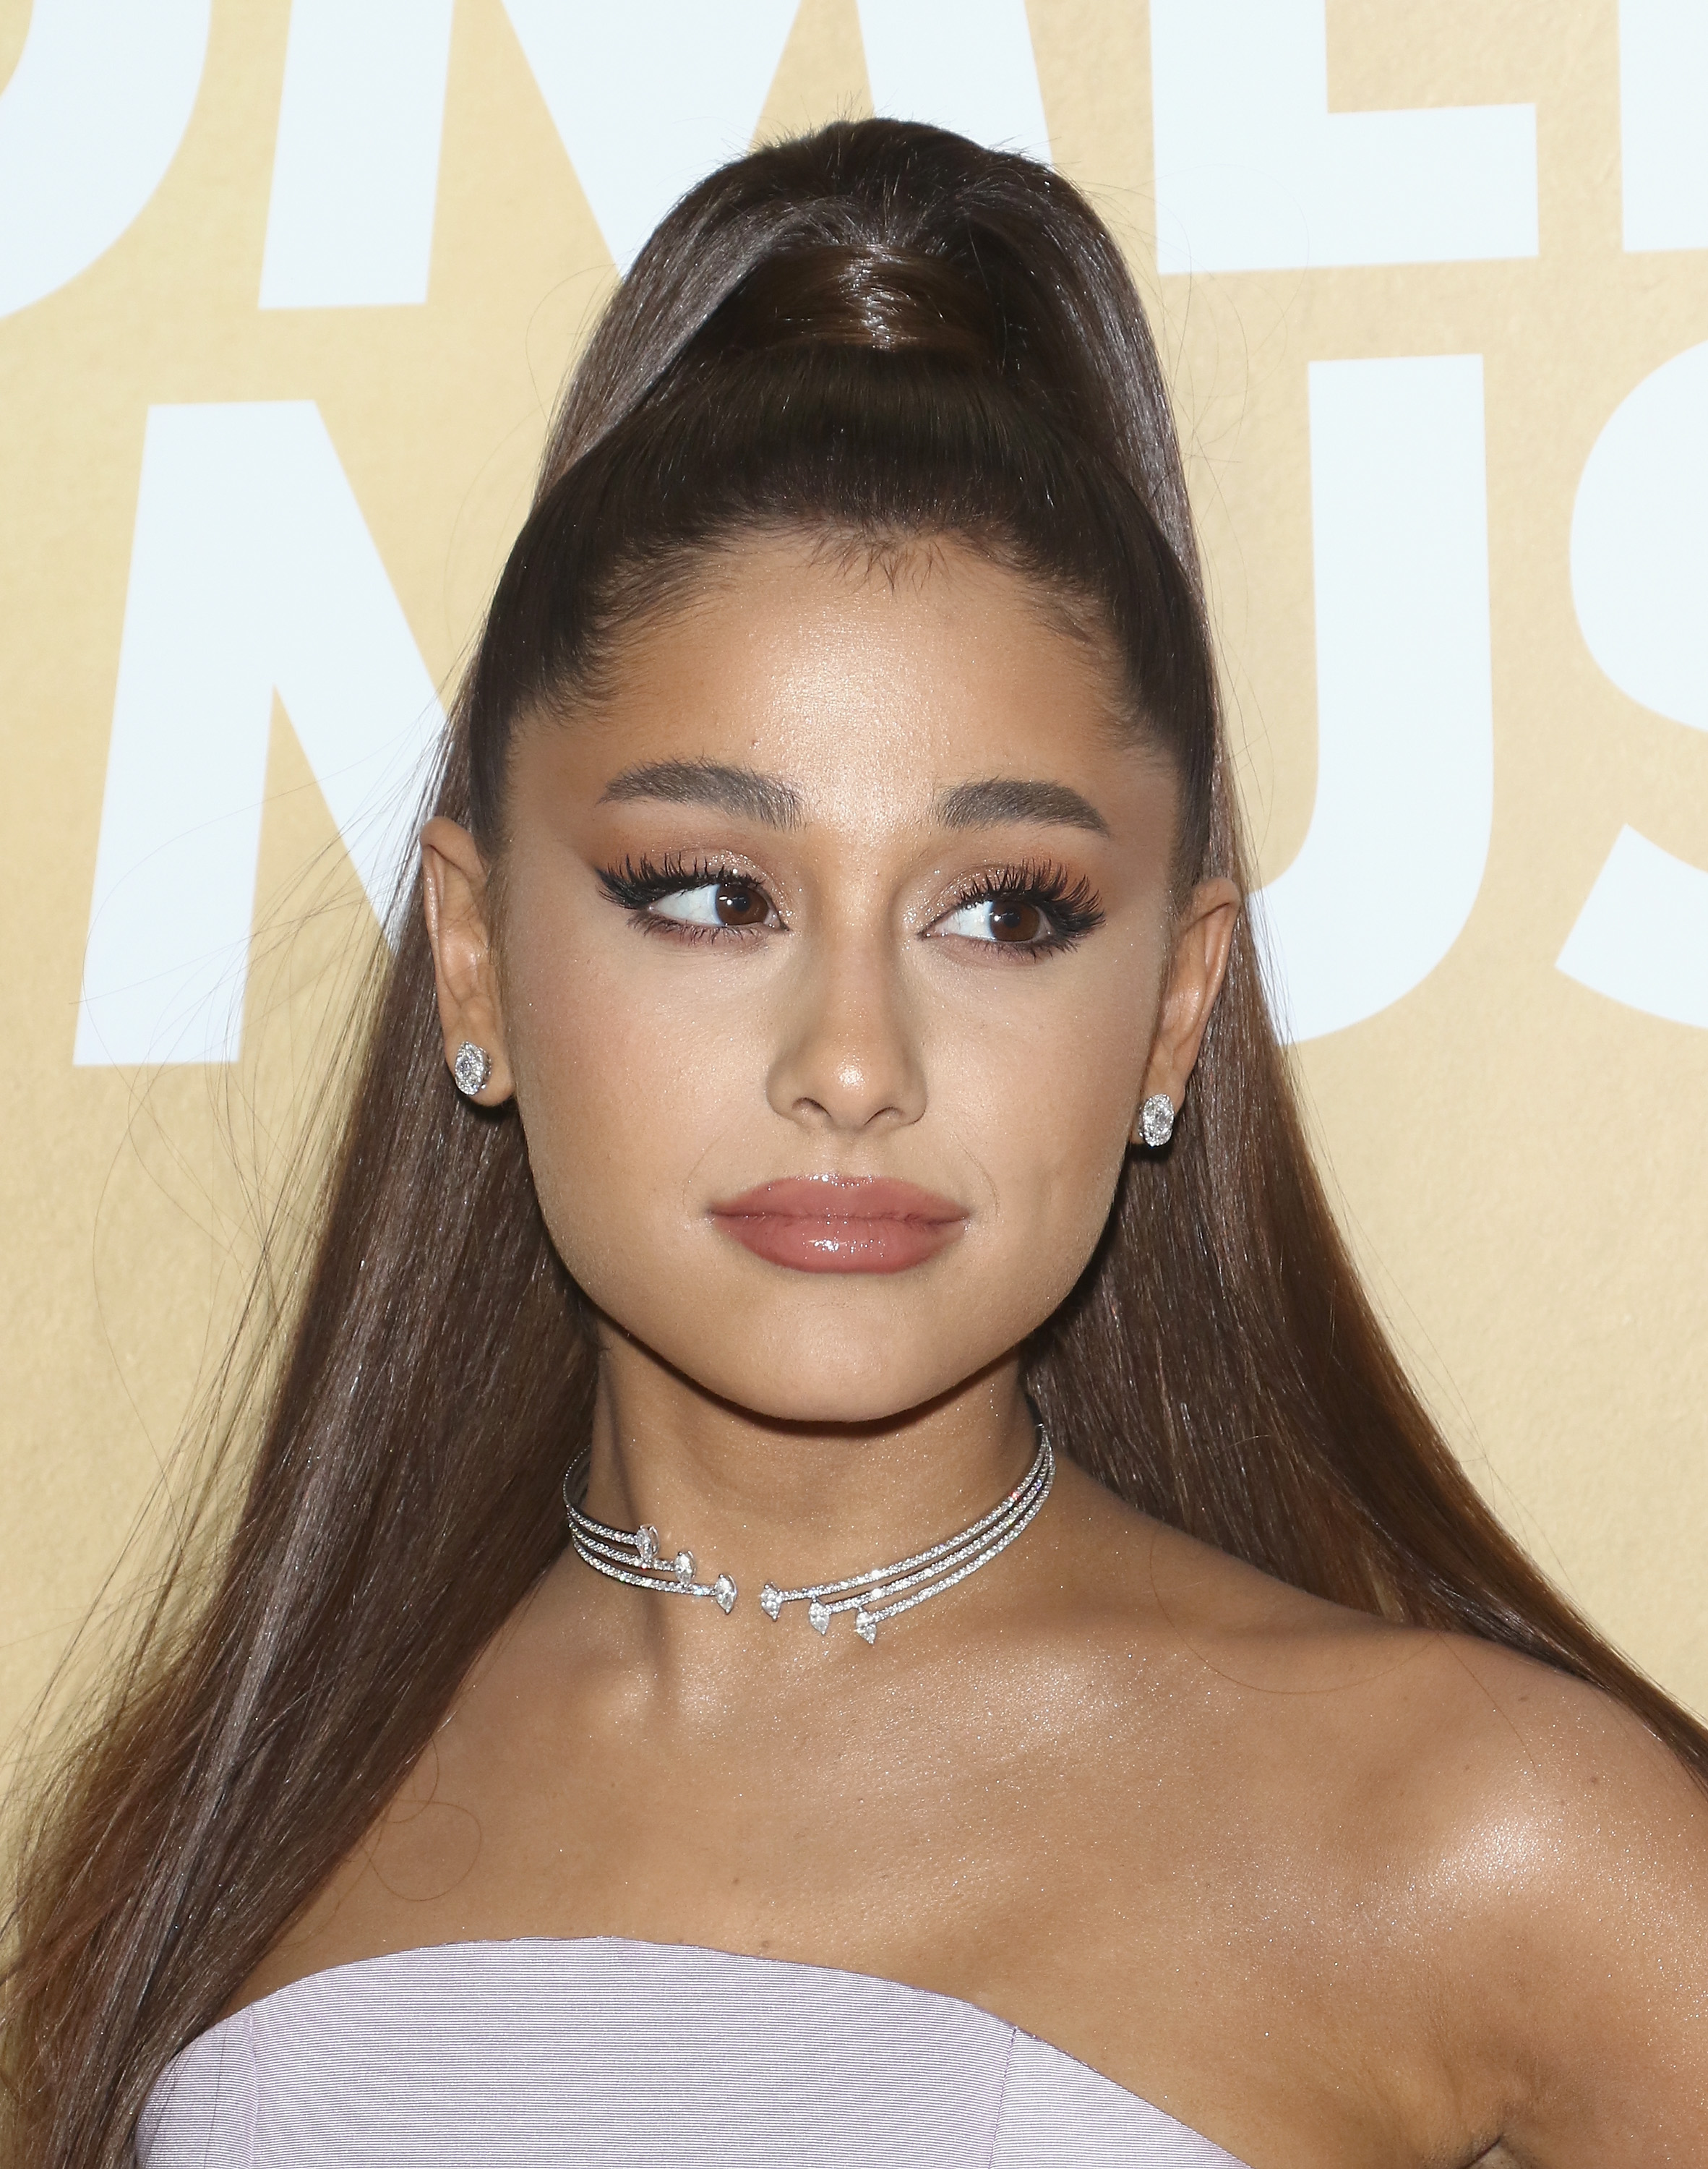 Ariana Grande at the Billboard's 13th Annual Women in Music event at Pier 36 on December 6, 2018 in New York City. | Source: Getty Images